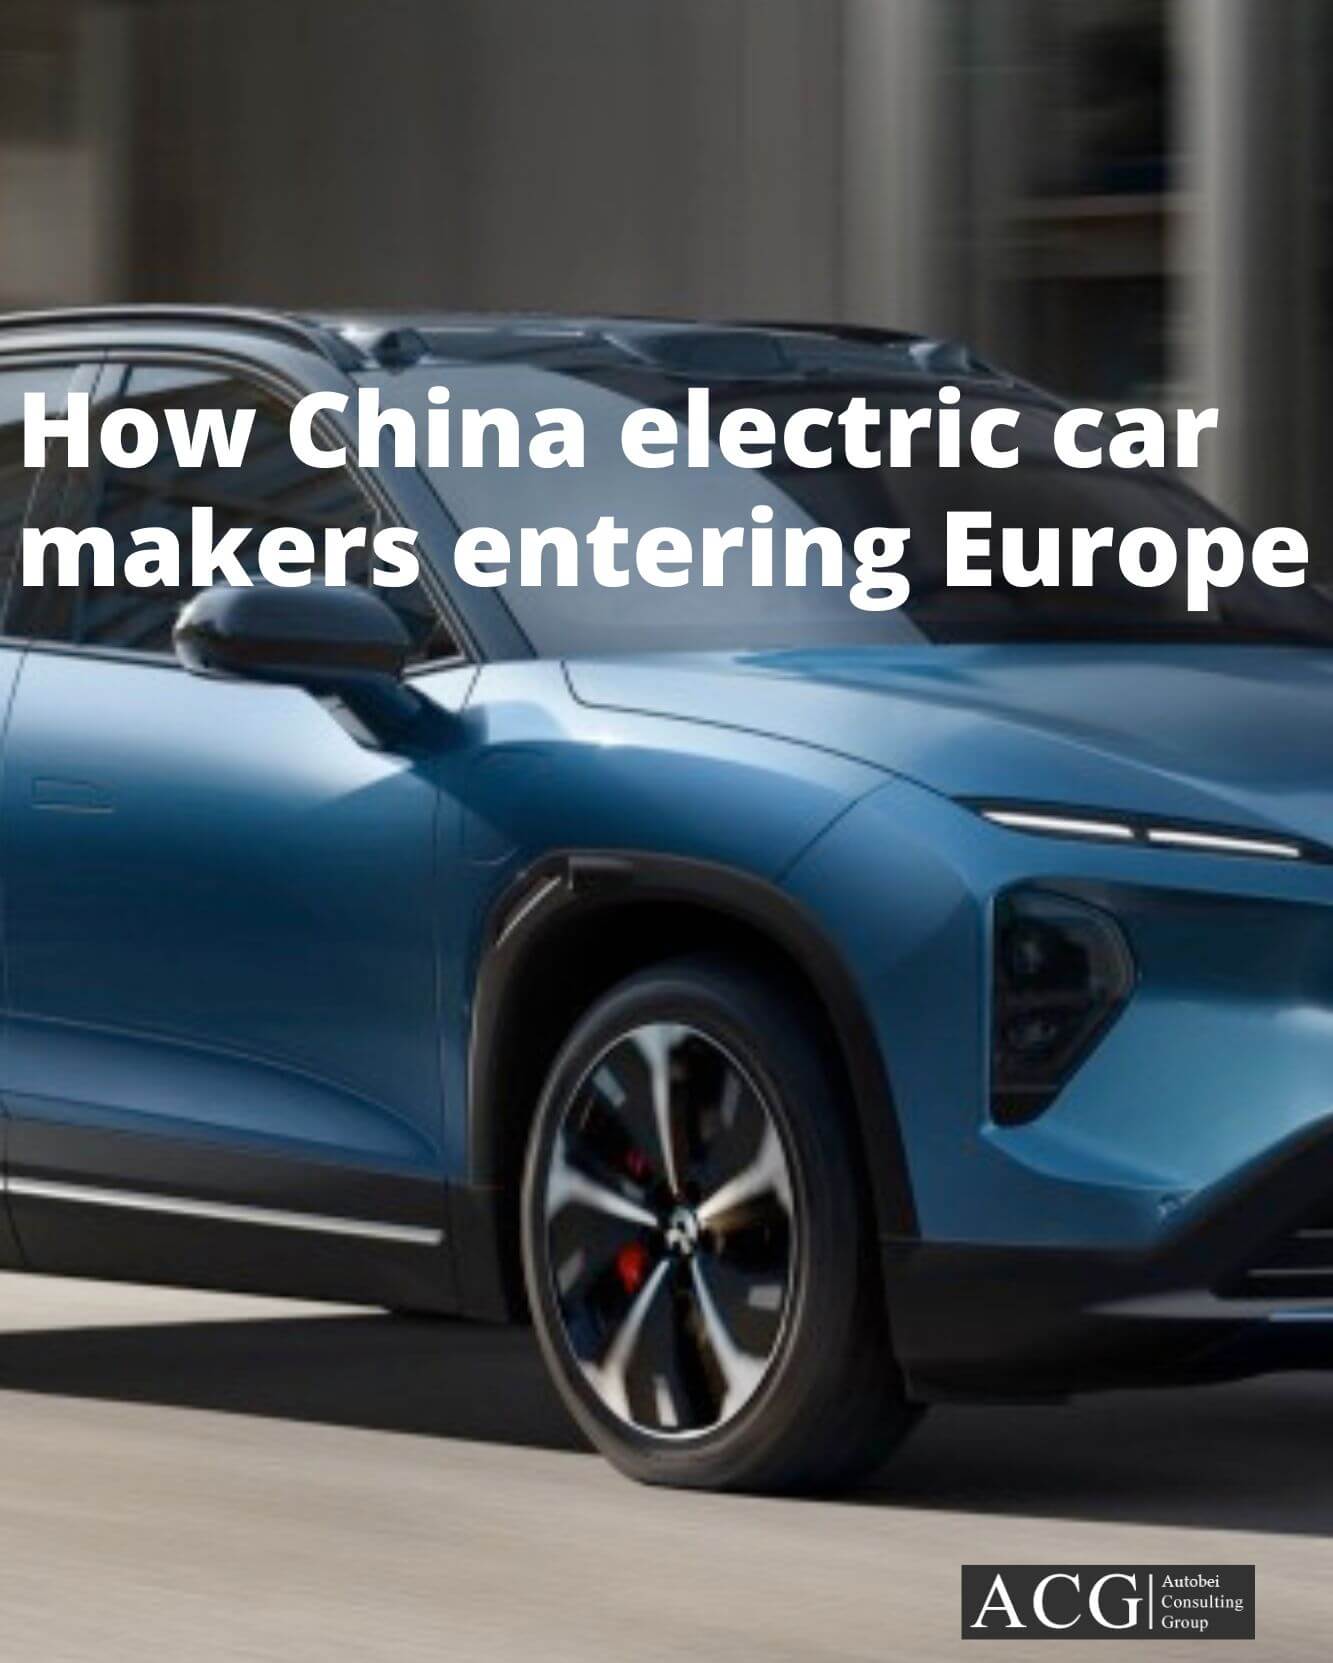 How China electric car makers entering Europe